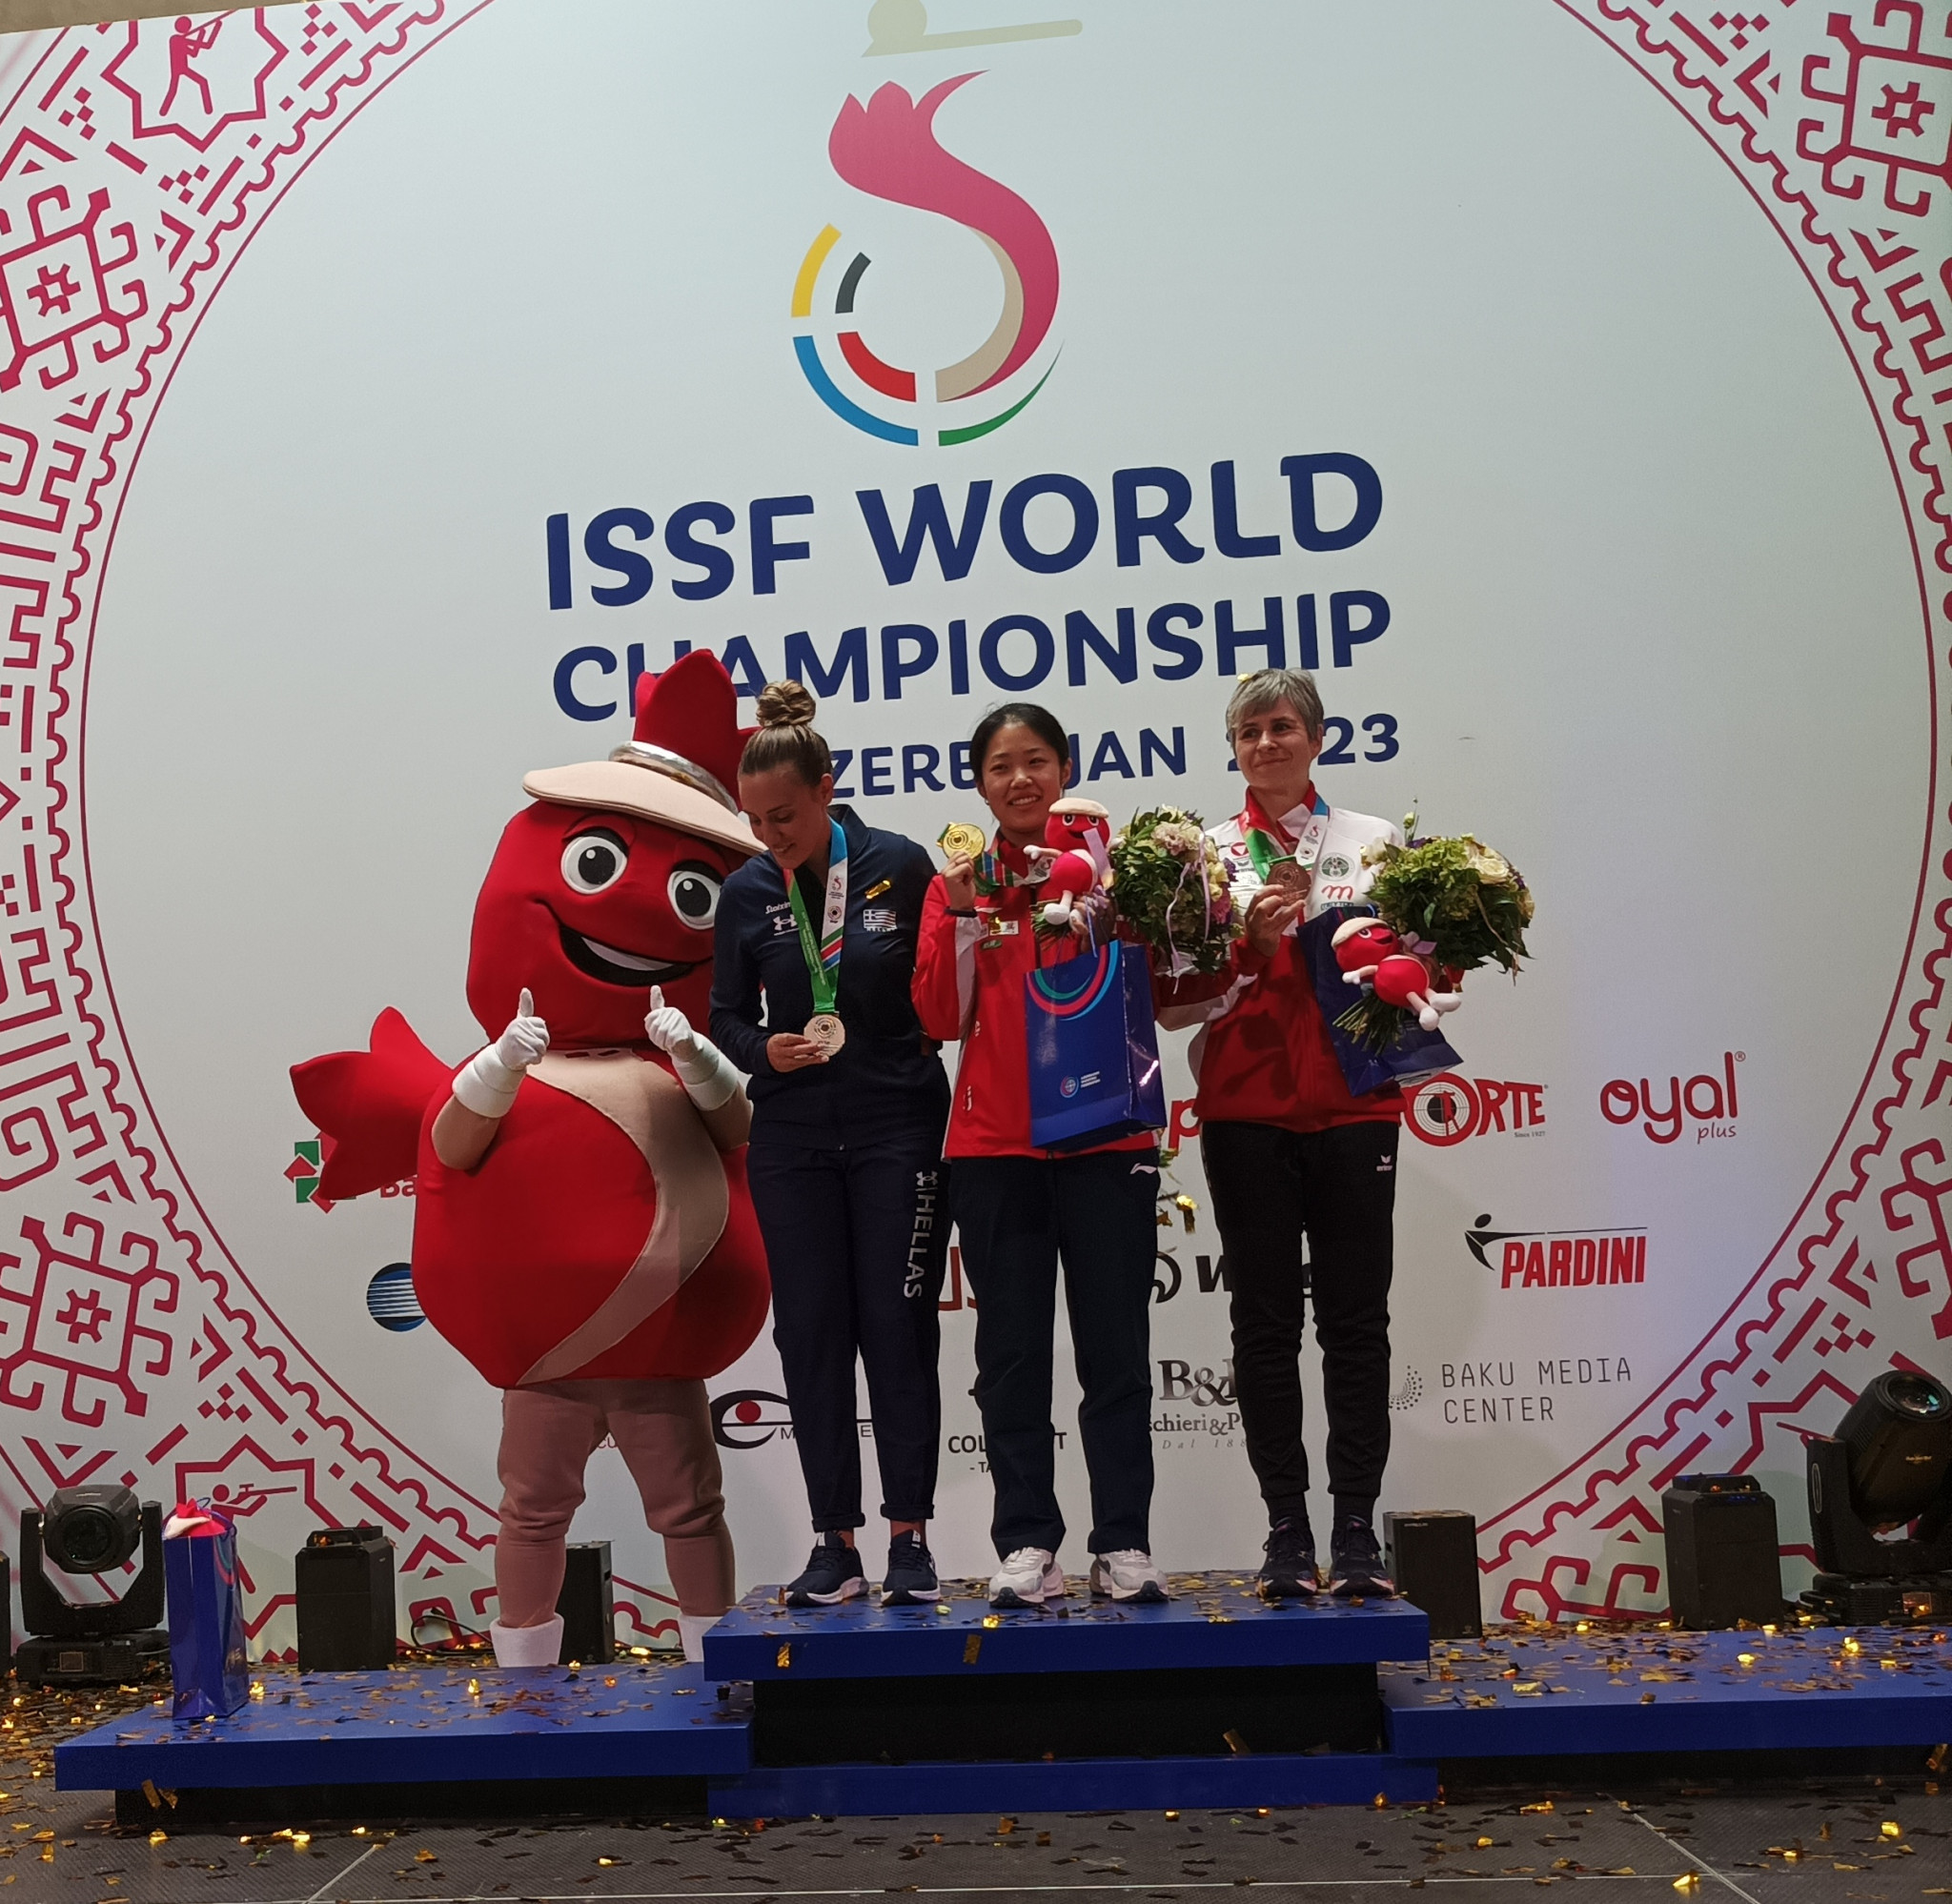 More Chinese gold as Azerbaijan win first medal at ISSF World Championships